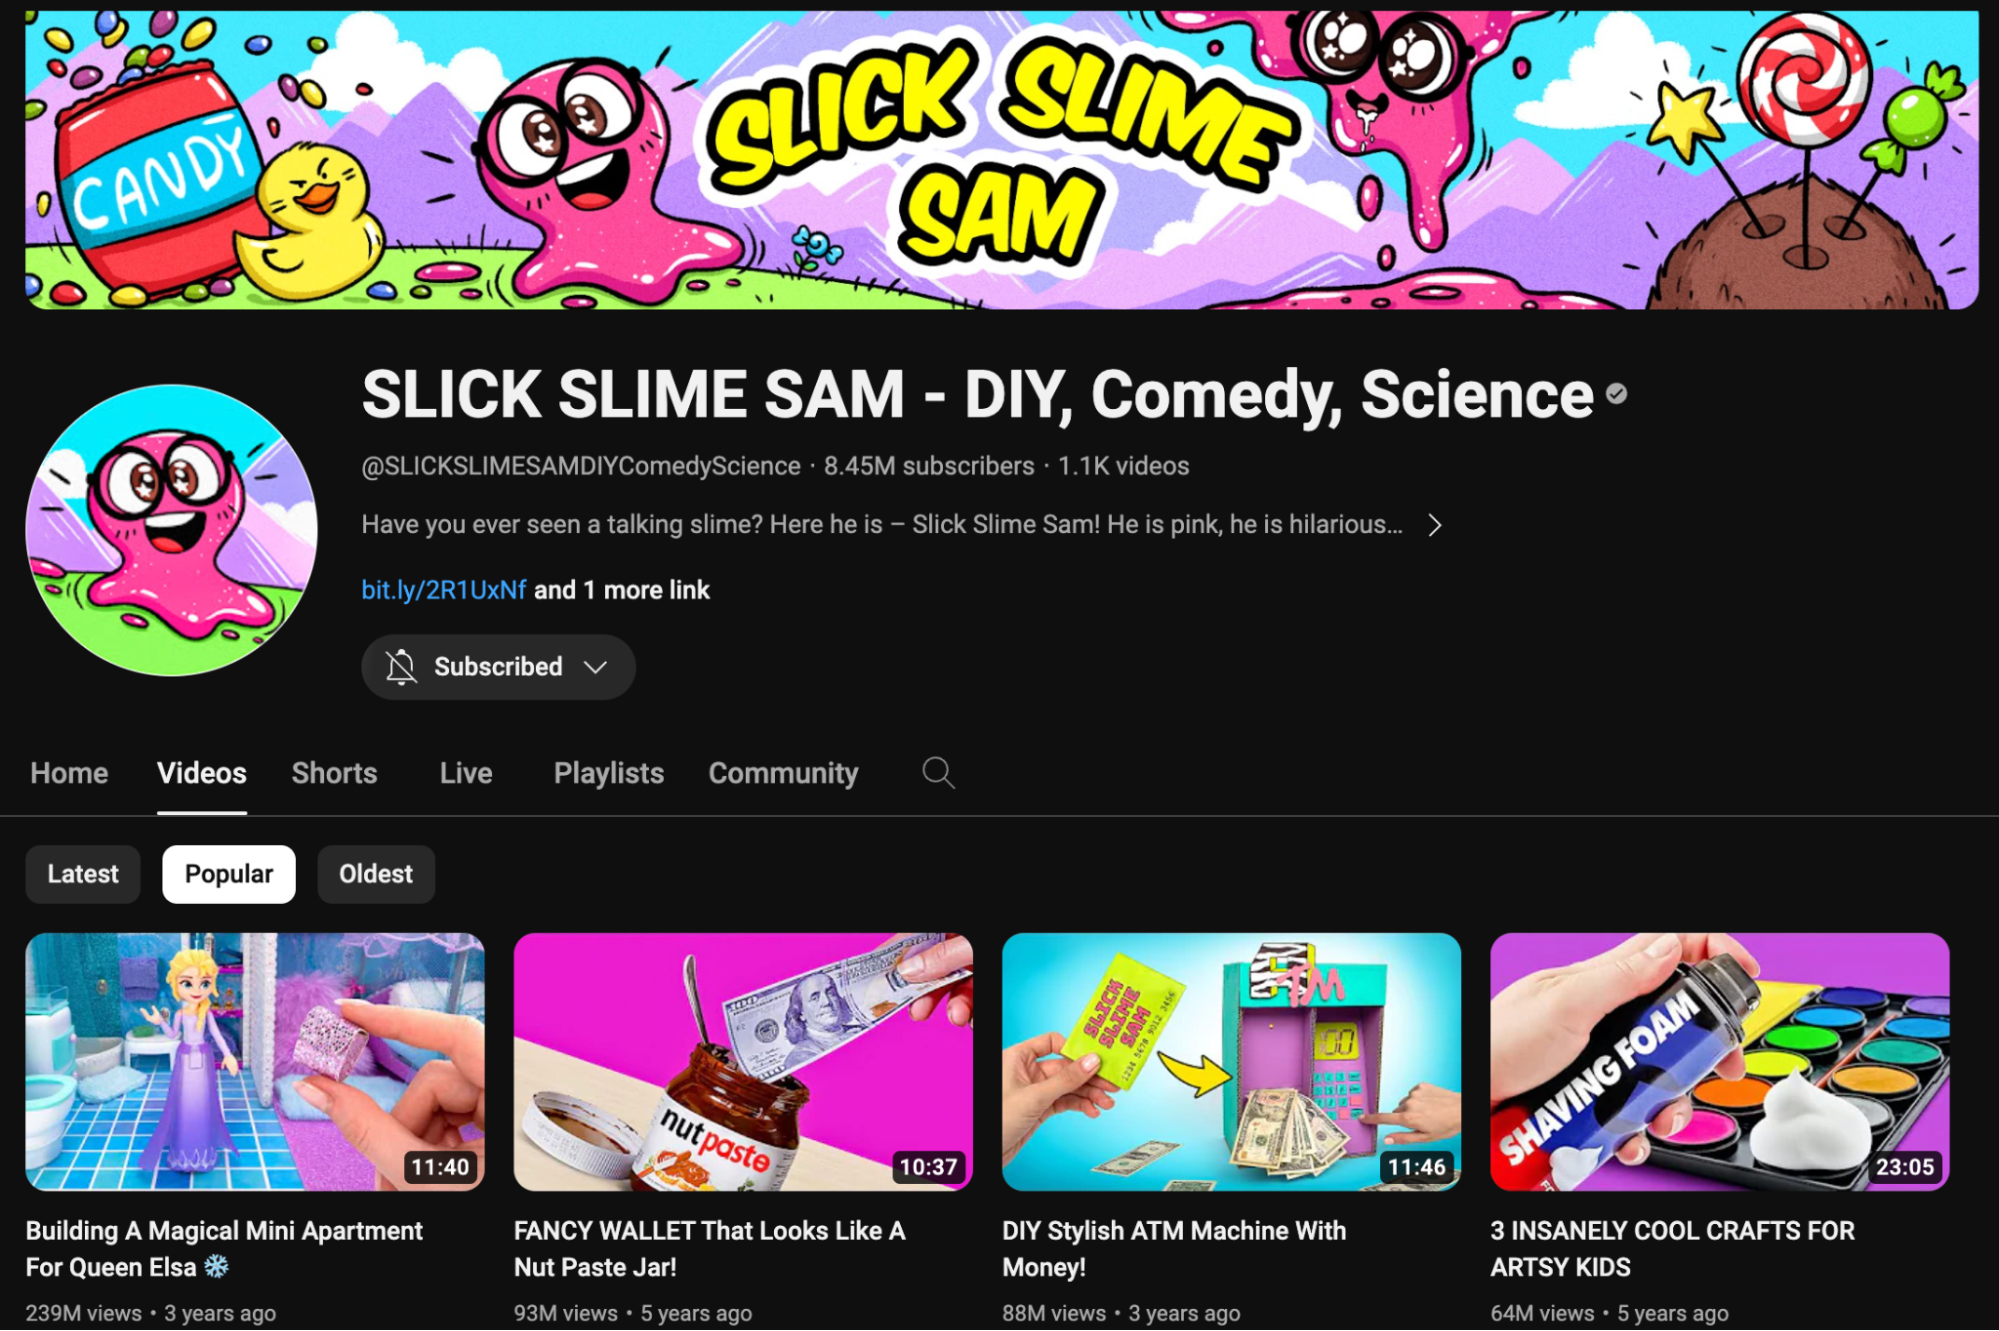 The Slick Slime Sam's YouTube channel page for kids